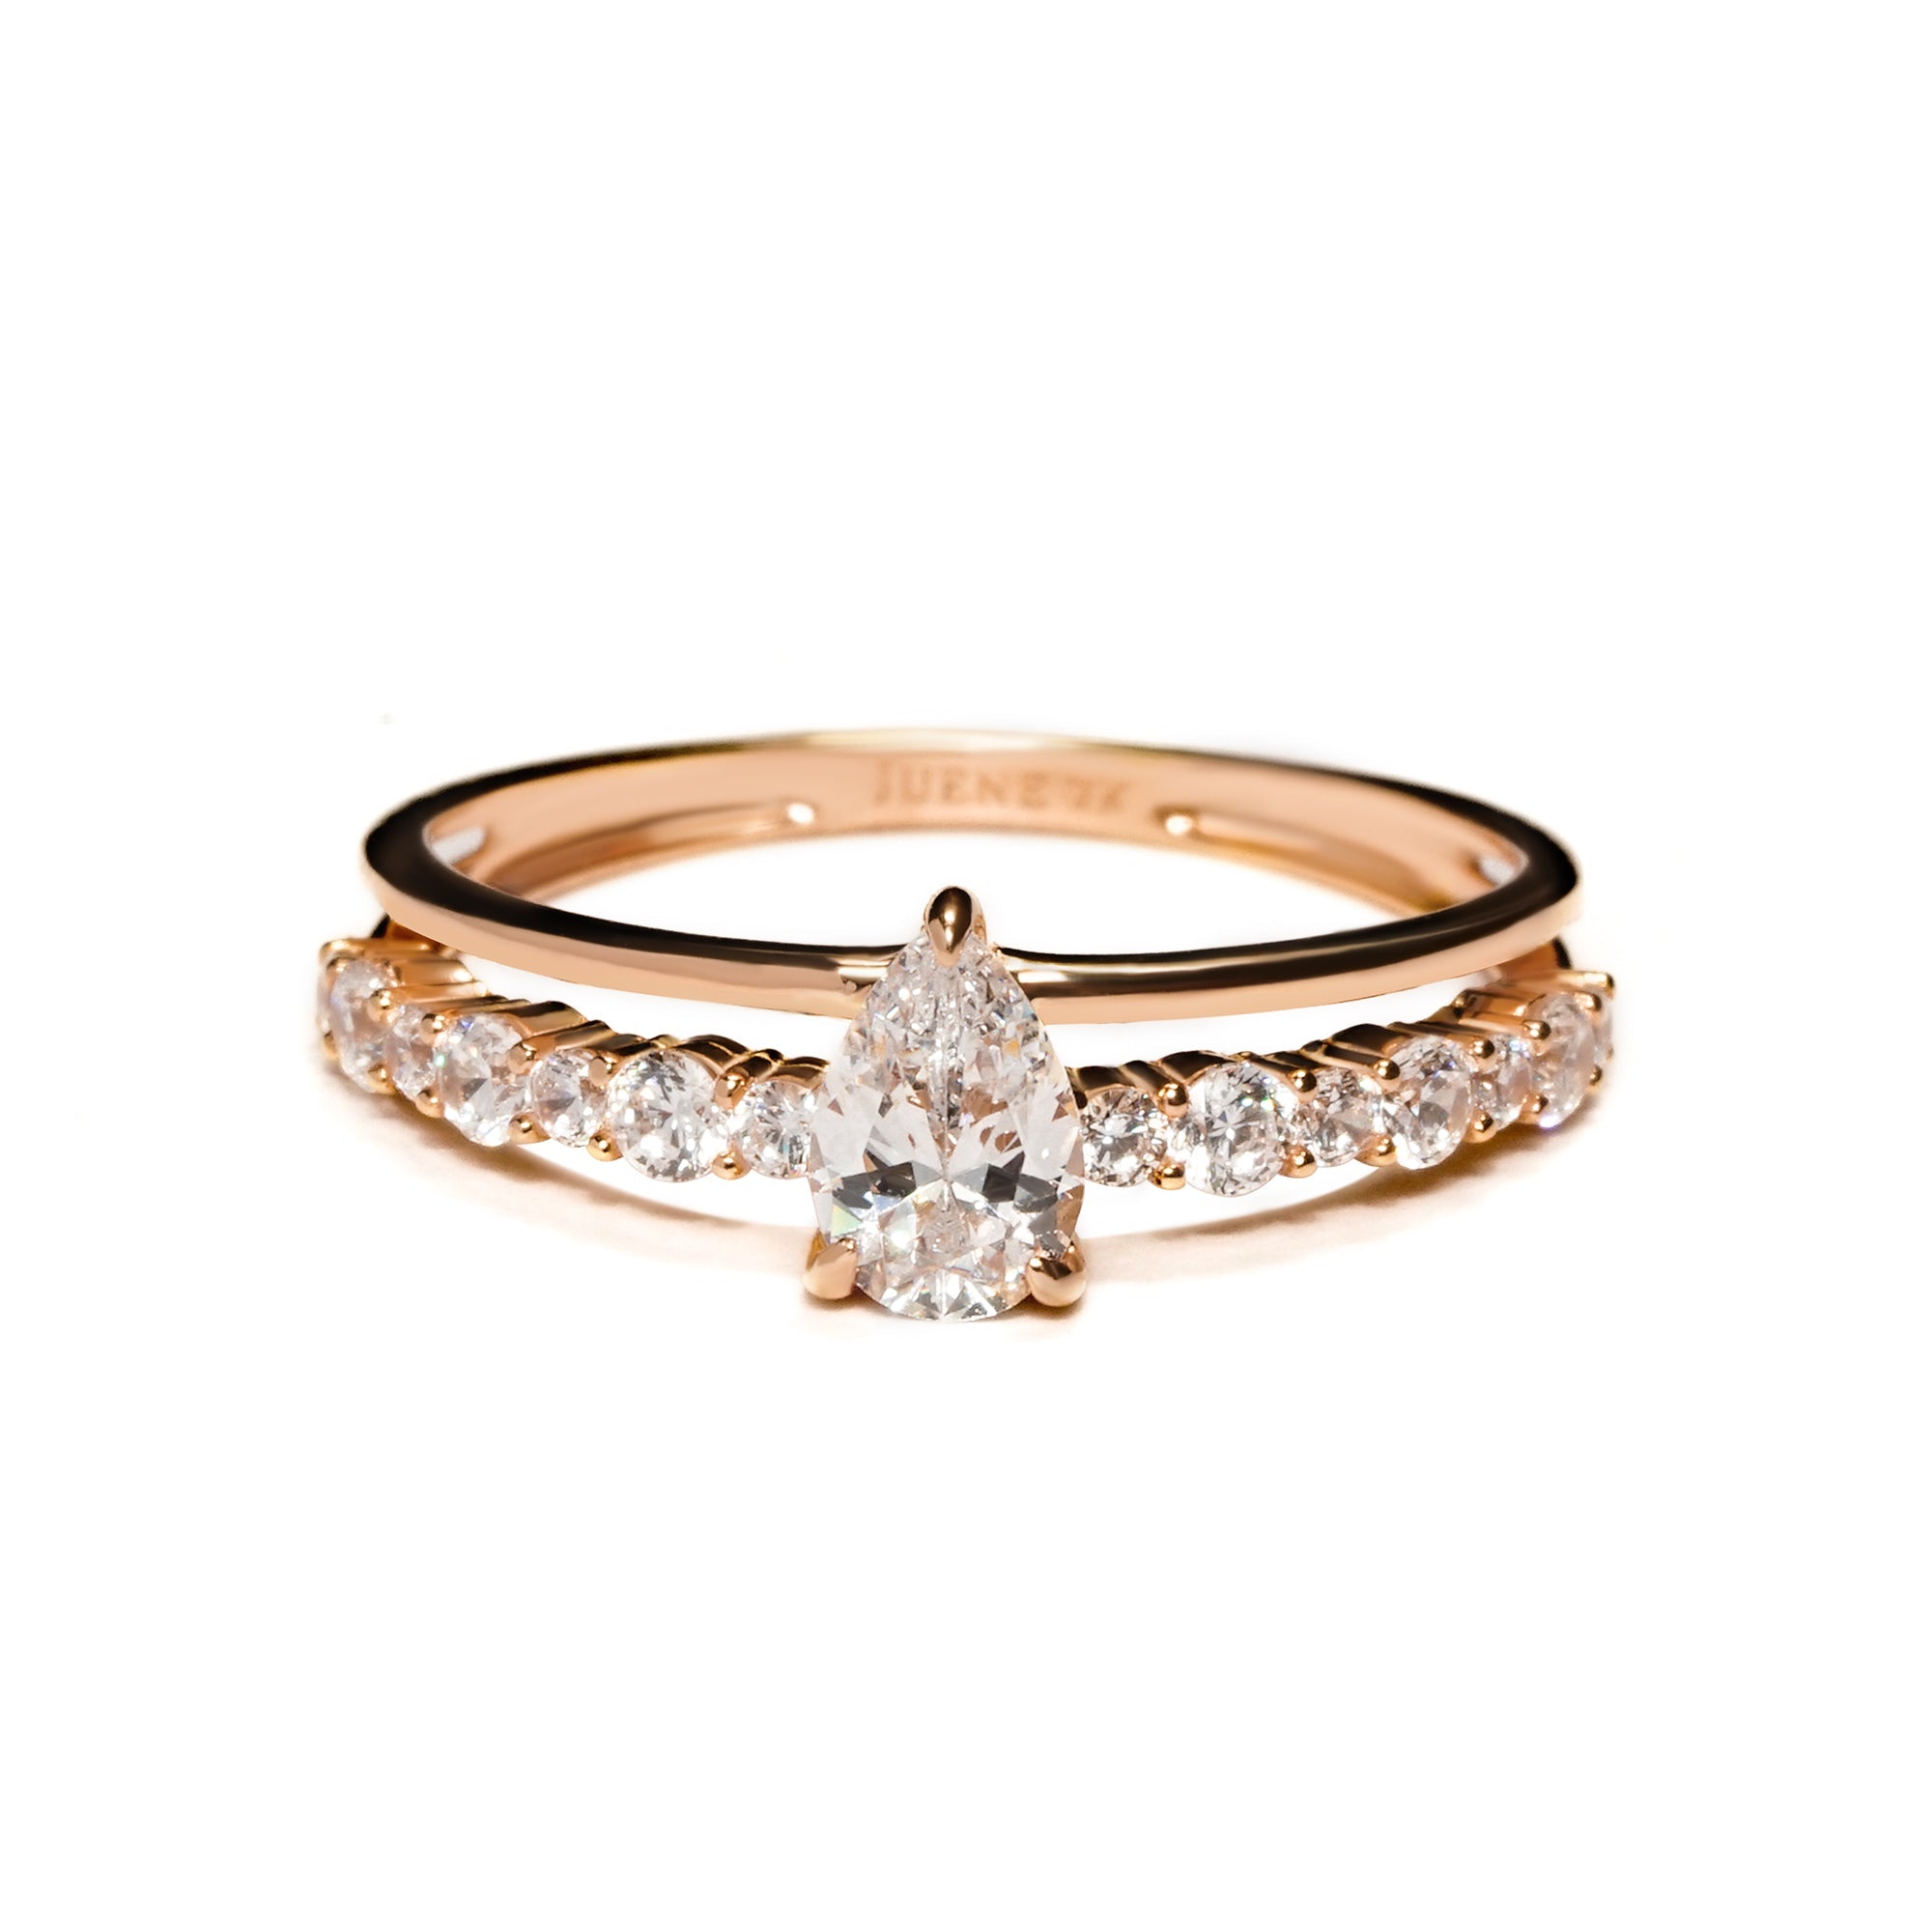 Rania Gold Ring - Serene Collection - Juene Jewelry